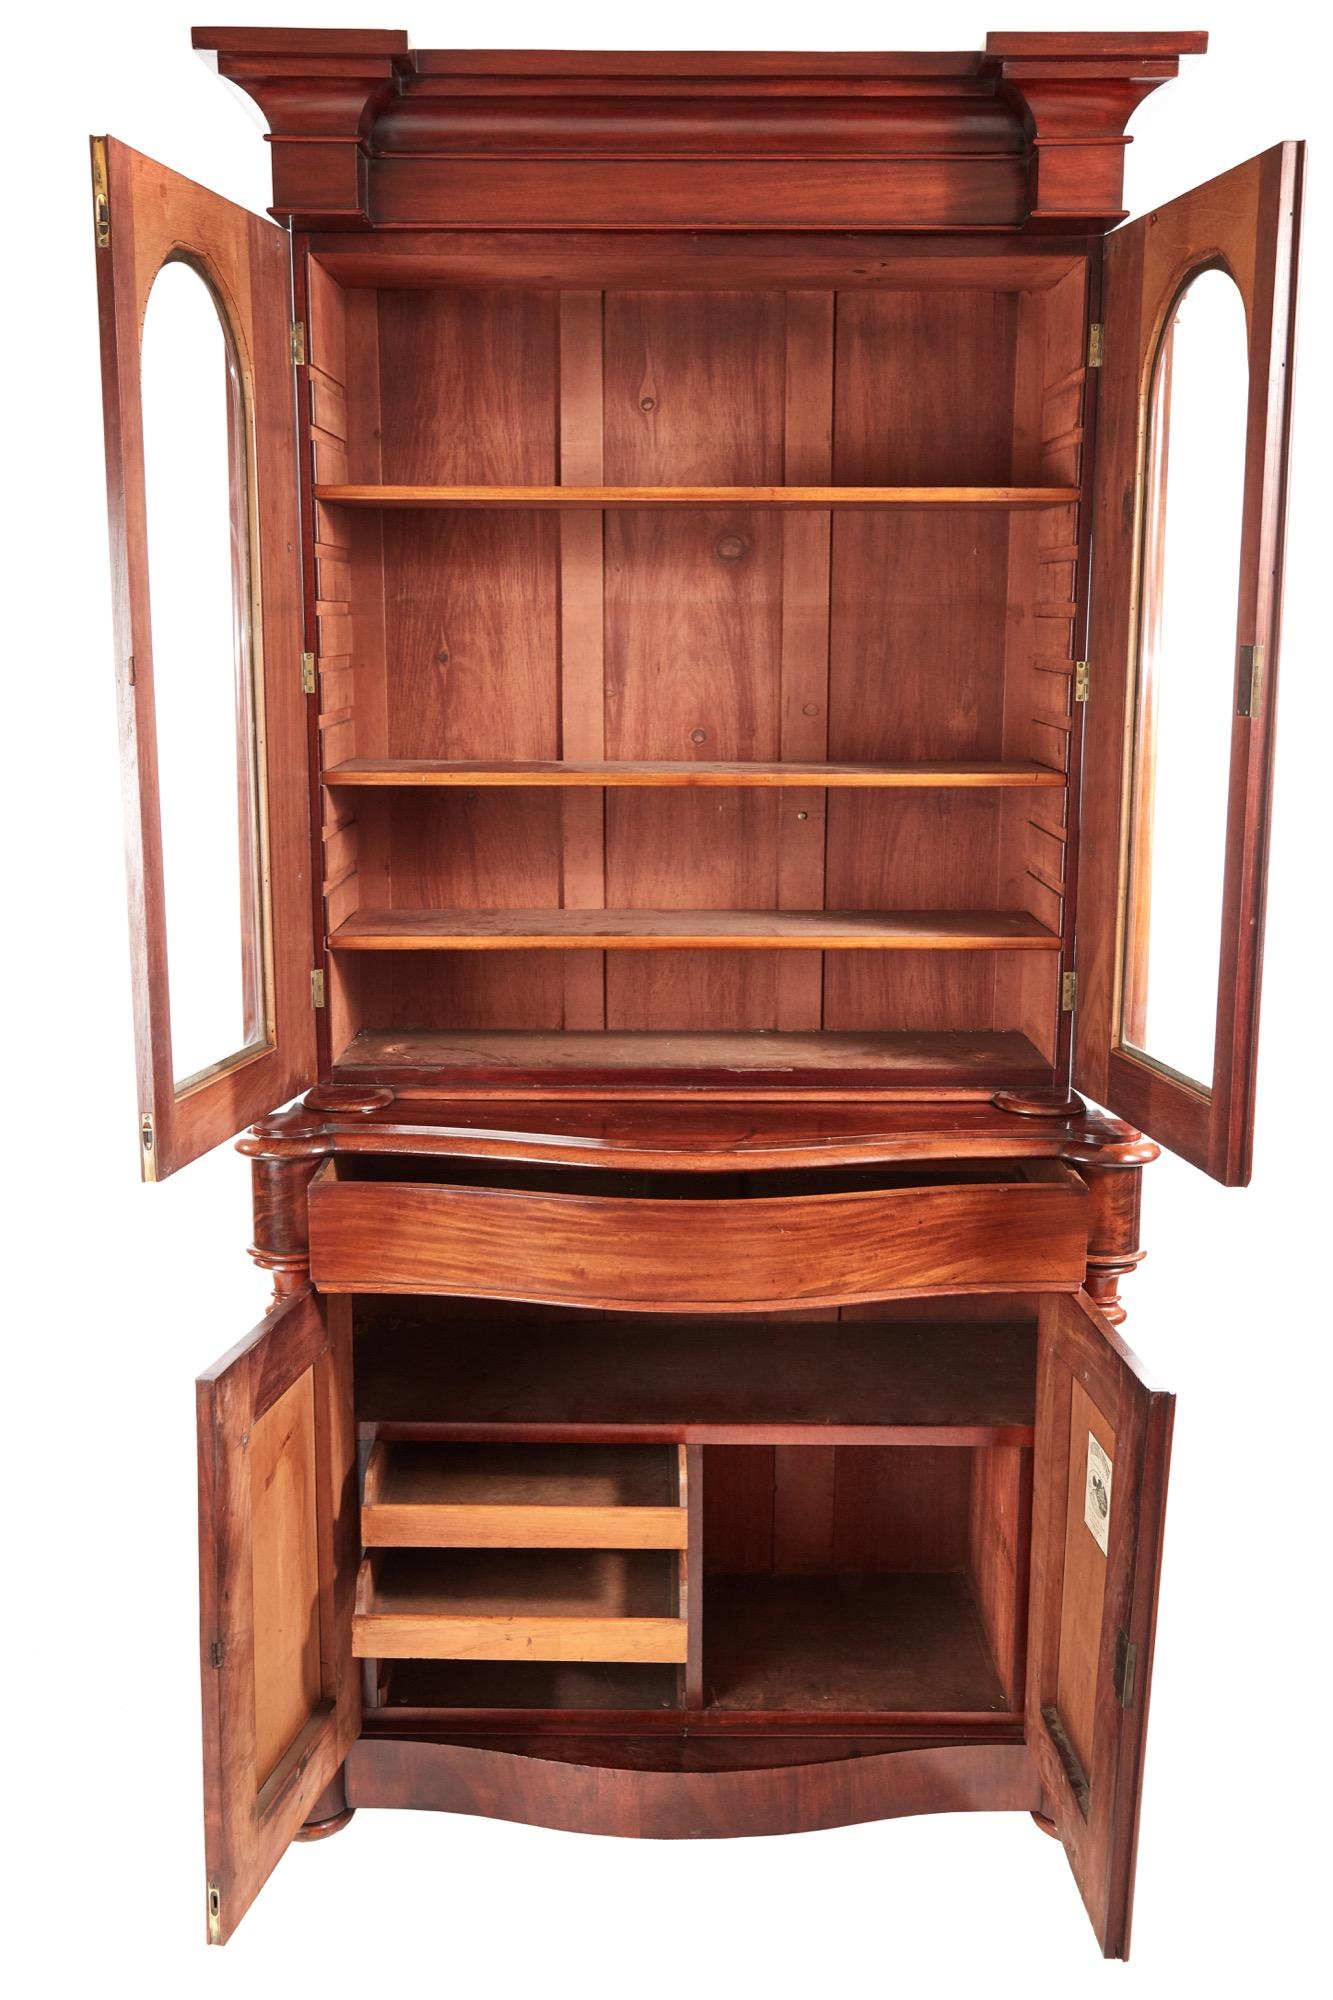 This is a quality 19th century Victorian antique mahogany bookcase. The upper section having an attractive shaped cornice over a pair of glazed doors with shaped mouldings and turned columns. The doors open to reveal an interior with adjustable